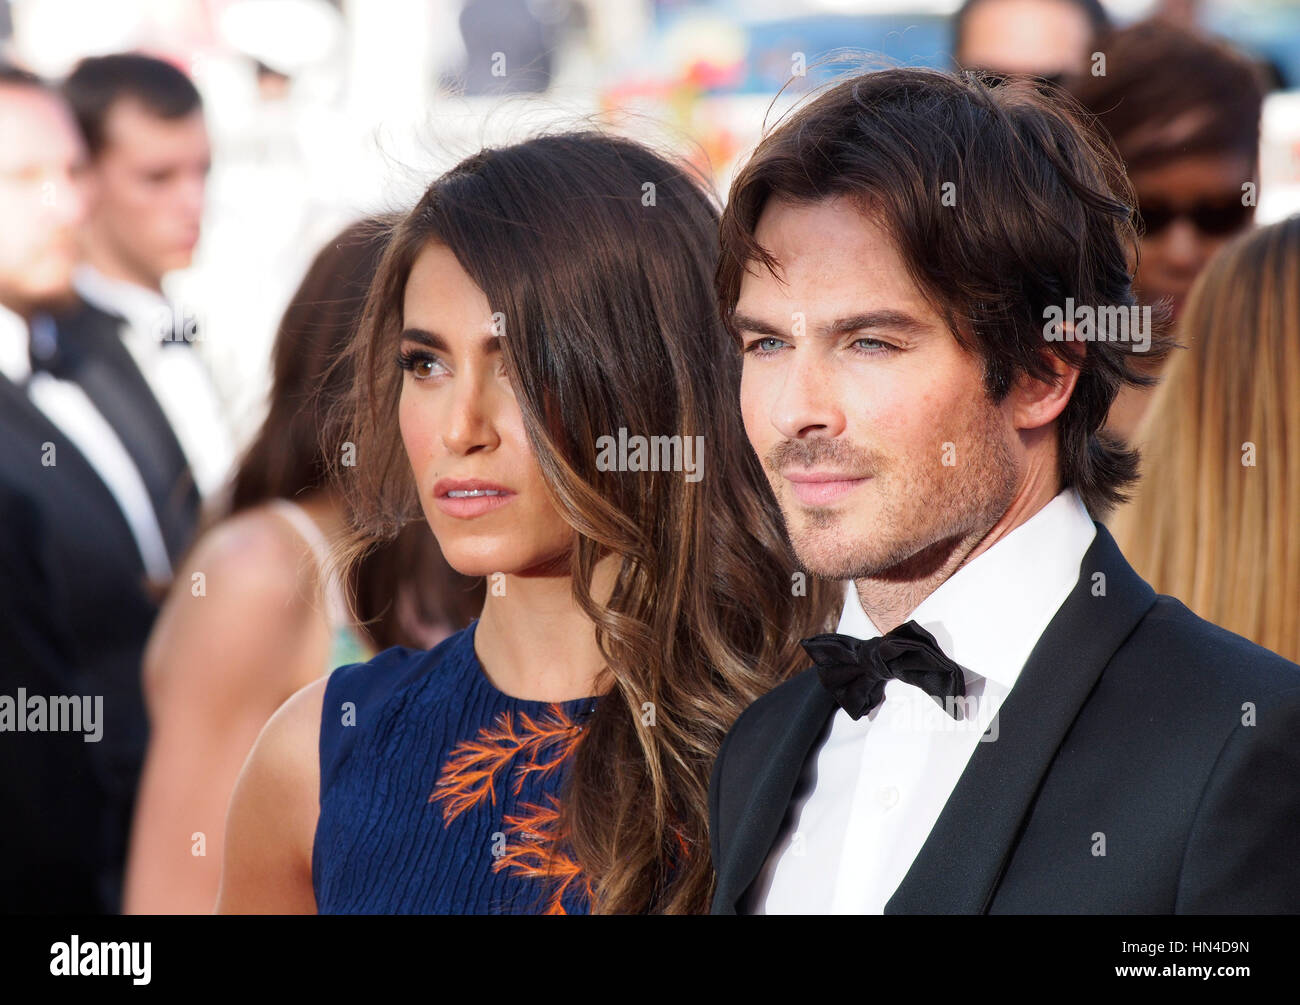 Nikki Reed and Ian Somerhalder arrive at the premiere for the film, 'Youth' at the 68th Cannes Film Festival on May 20, 2015 in Cannes, France.  Photo by Francis Specker Stock Photo